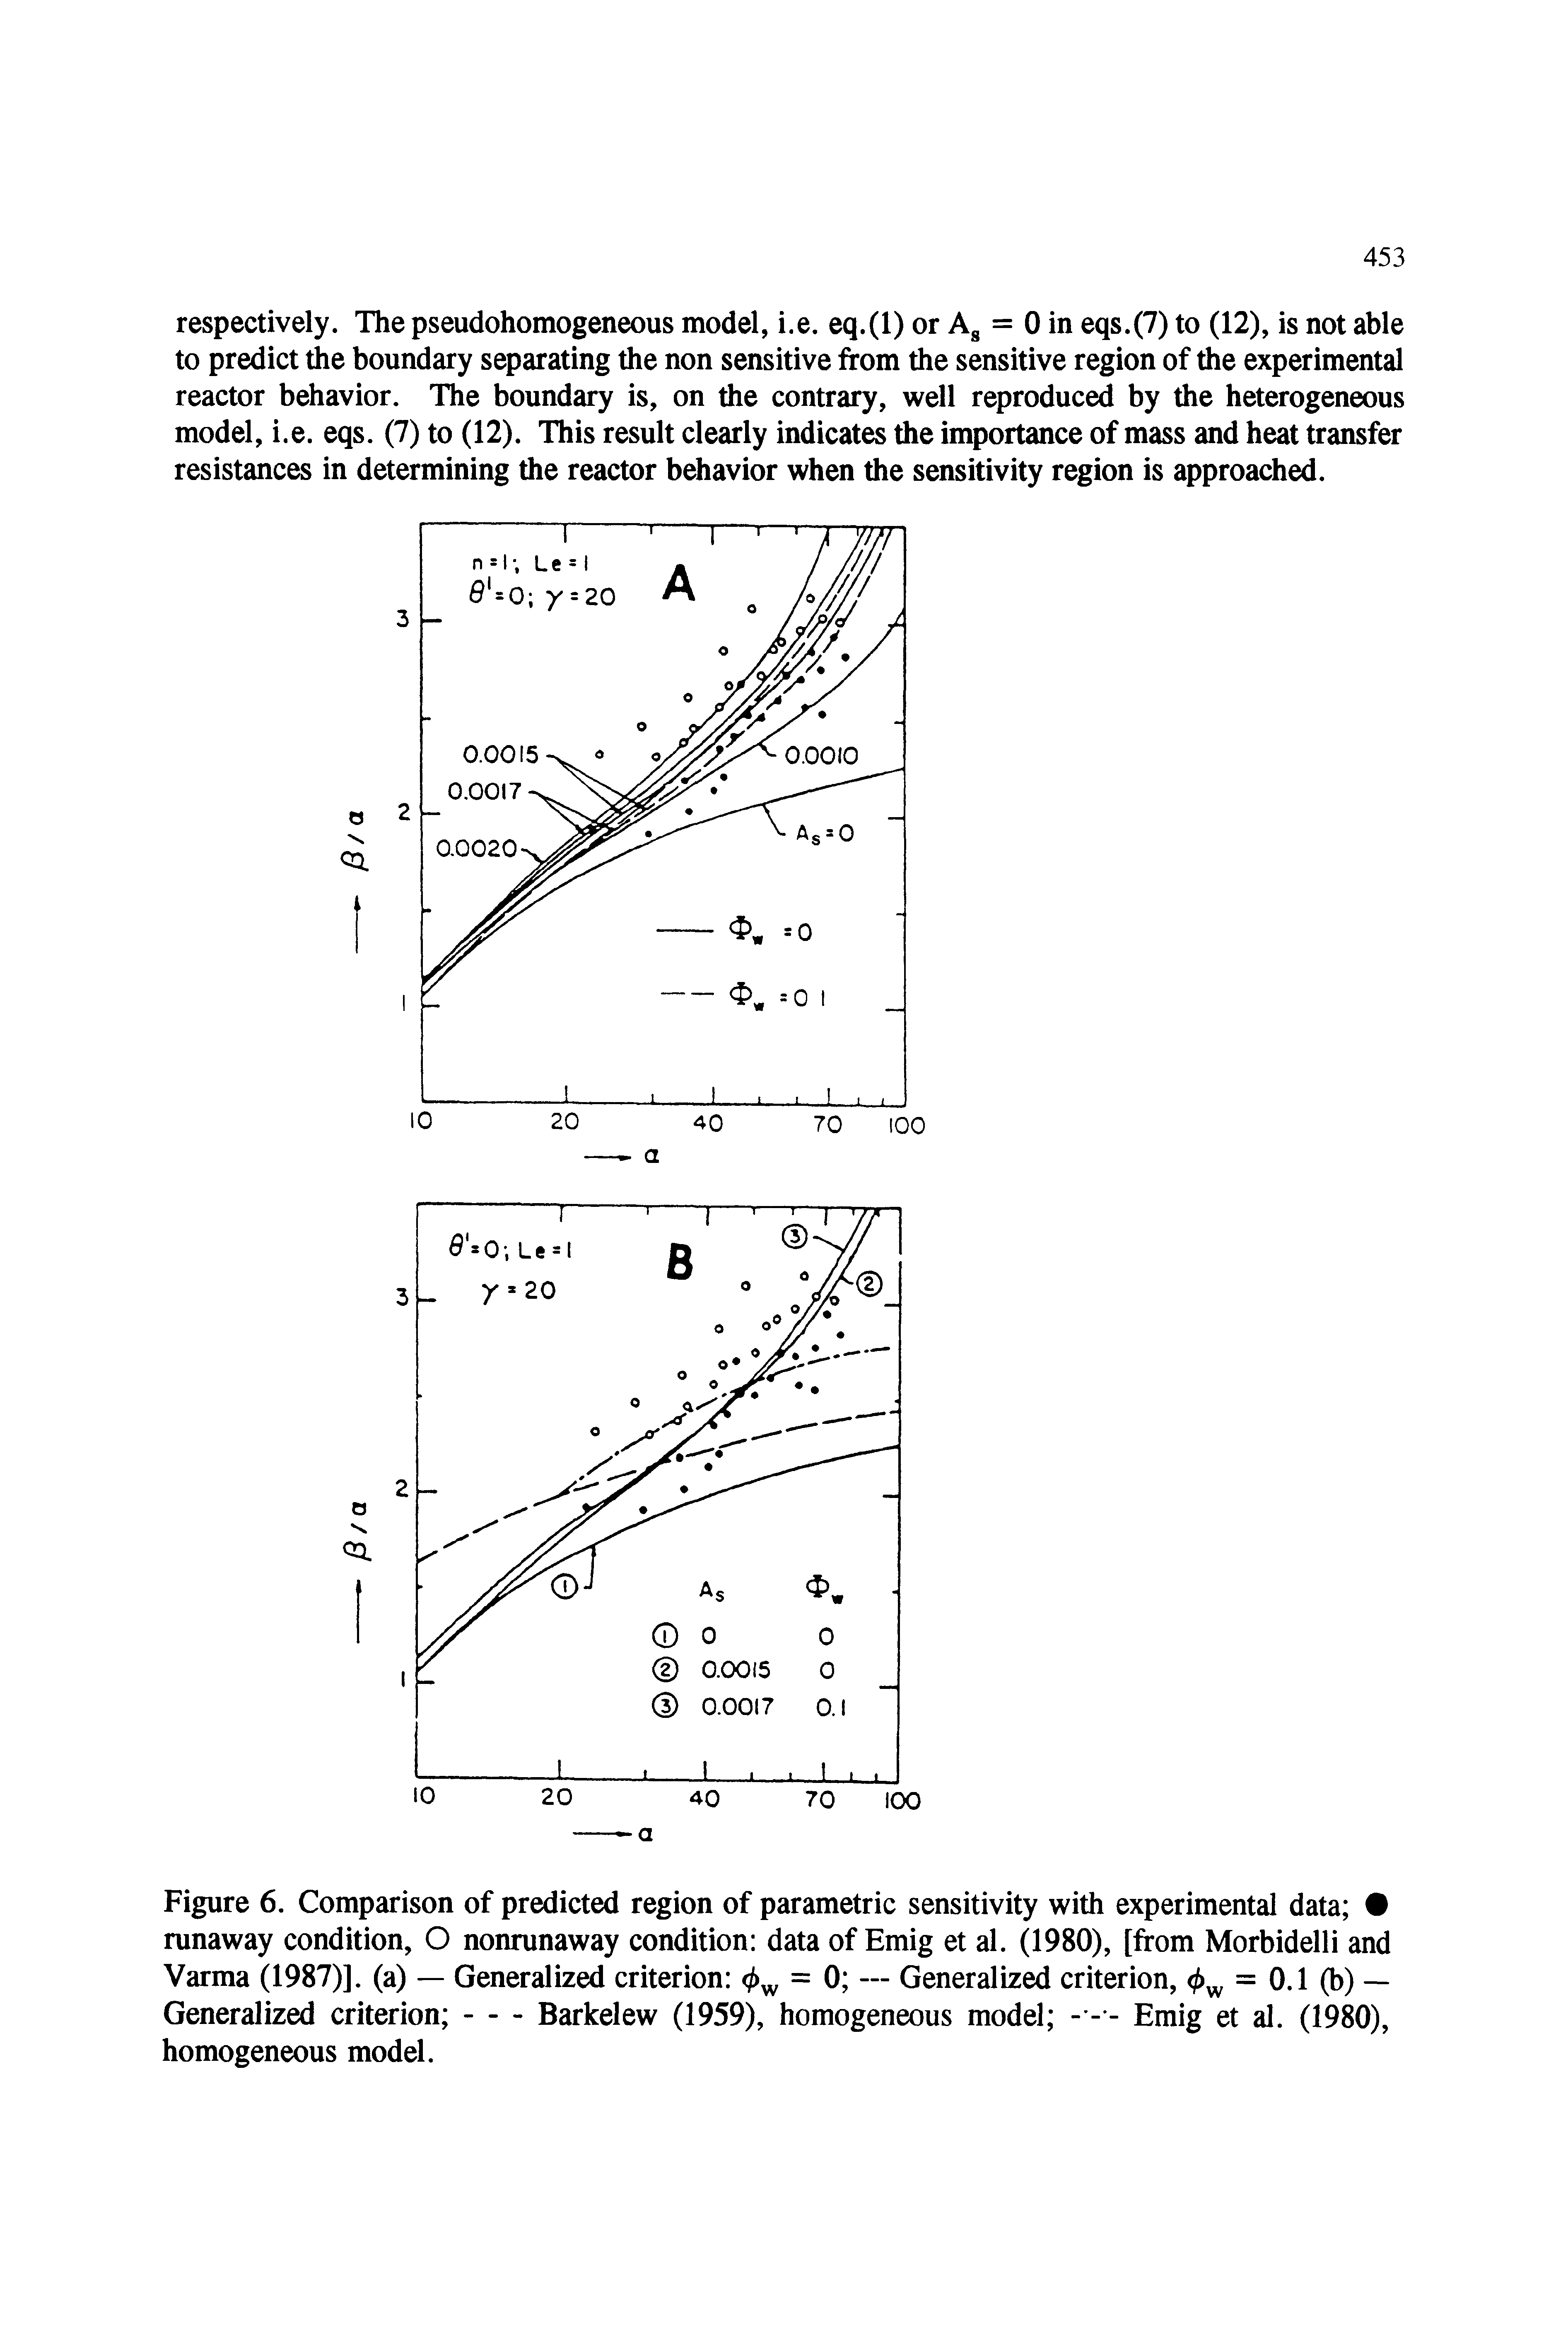 Figure 6. Comparison of predicted region of parametric sensitivity with experimental data runaway condition, O nonrunaway condition data of Emig et al. (1980), [from Morbidelli and Varma (1987)]. (a) — Generalized criterion <l> = 0 — Generalized criterion, = 0.1 (b) —...